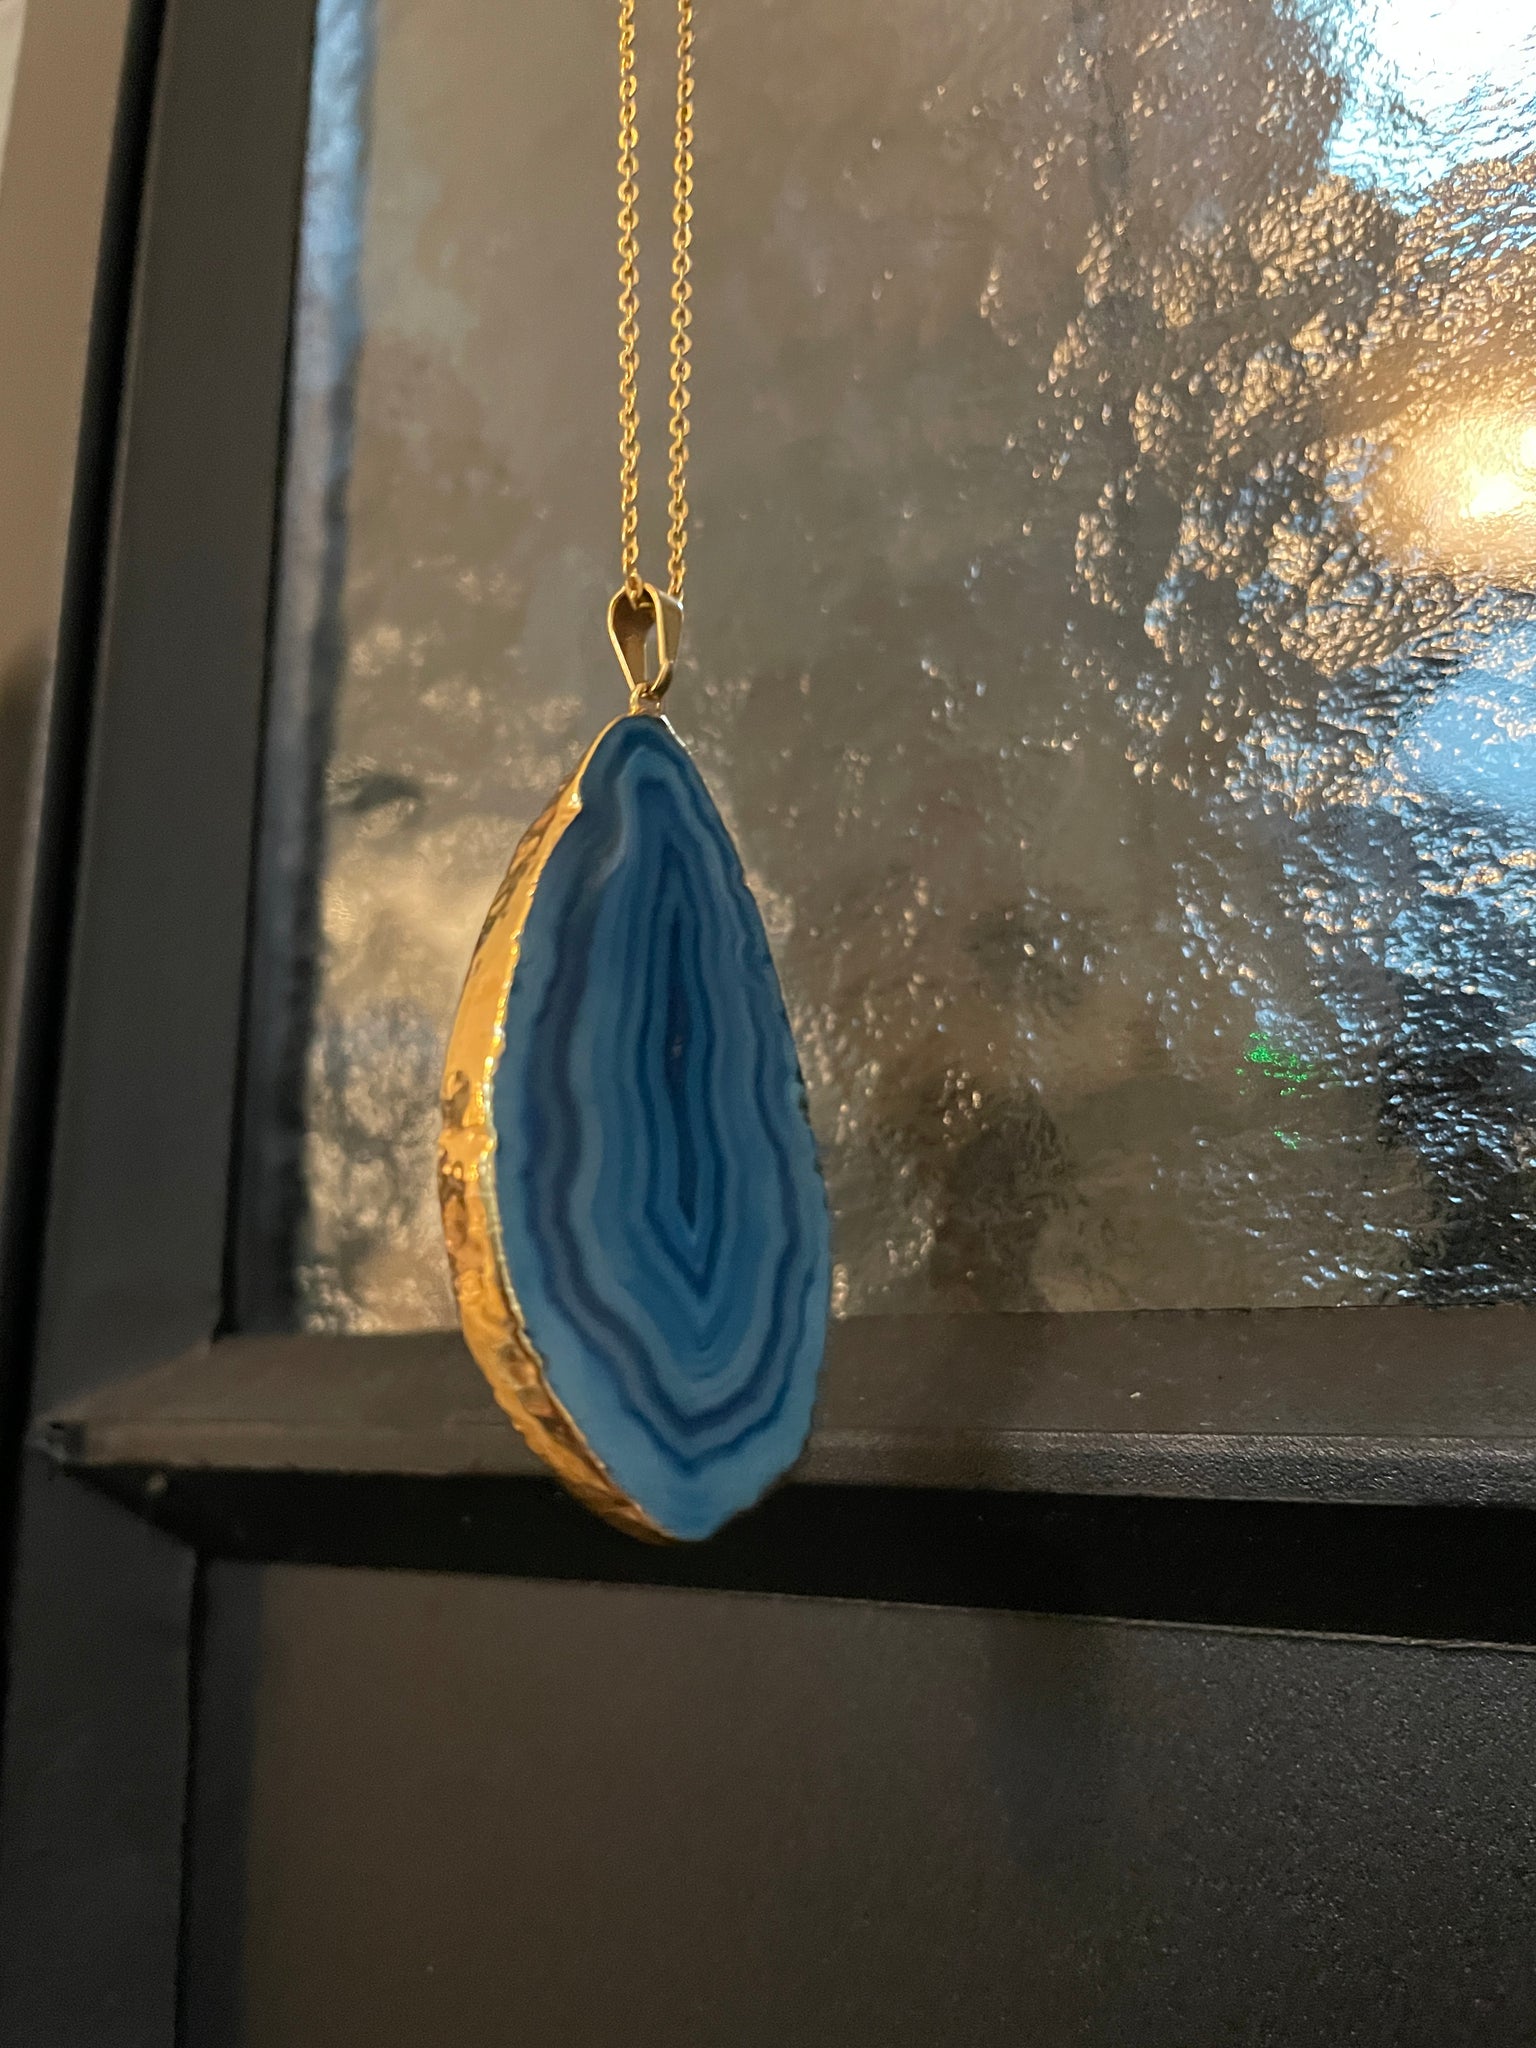 Necklace Agate Blue Patterned with Golden Edge